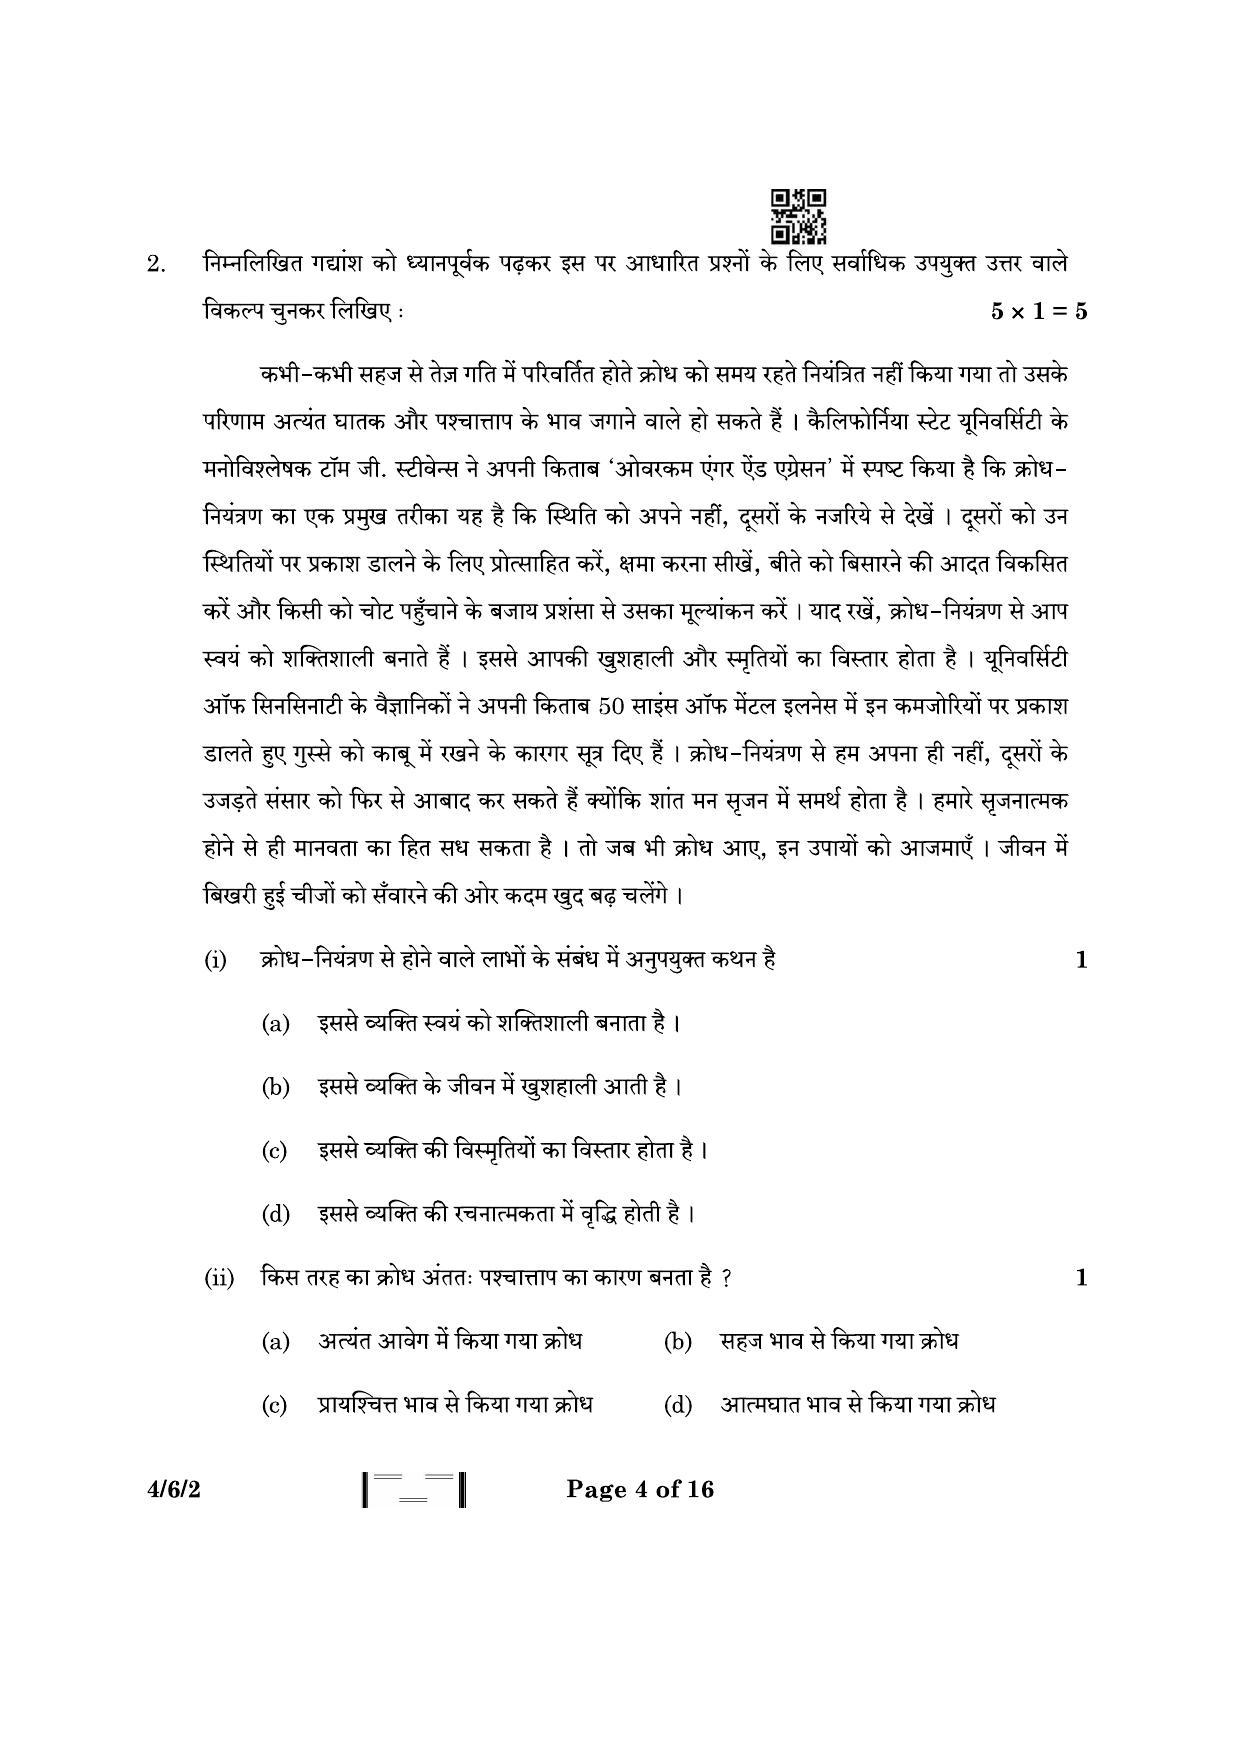 CBSE Class 10 4-6-2 Hindi B 2023 Question Paper - Page 4